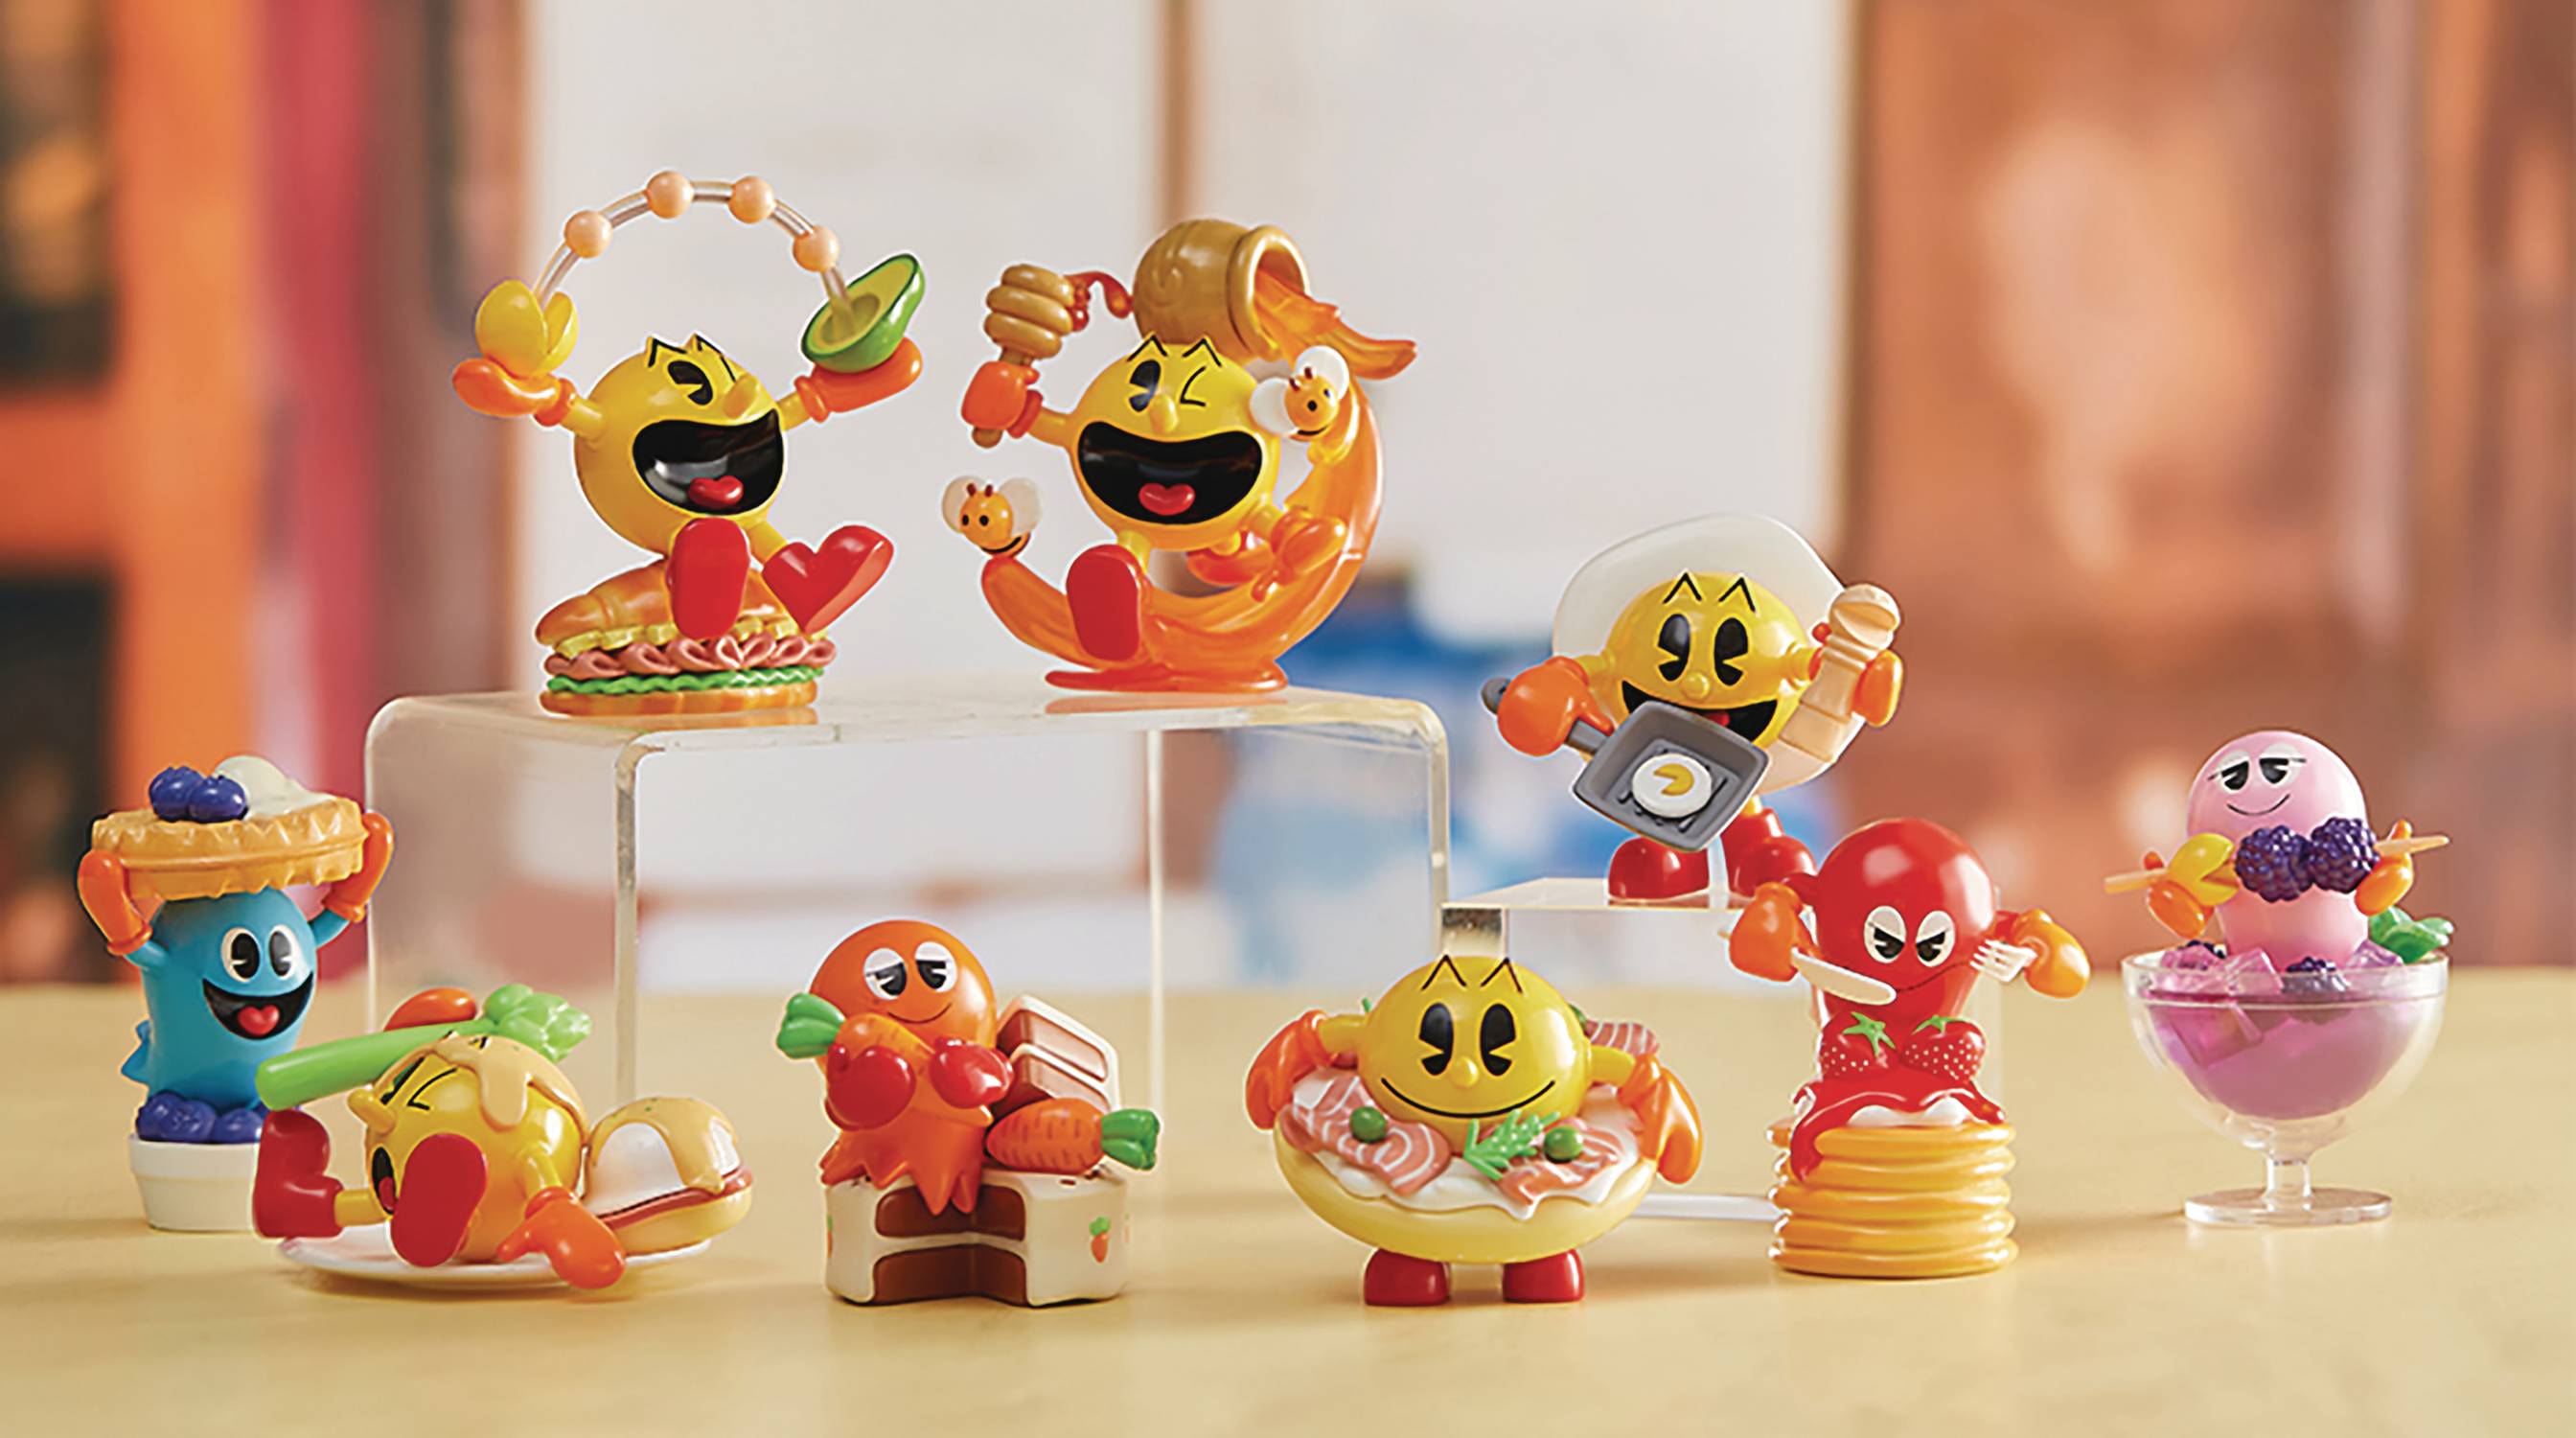 CJOY TOY PAC-MAN GOES TO BRUNCH 8PC BMB DS